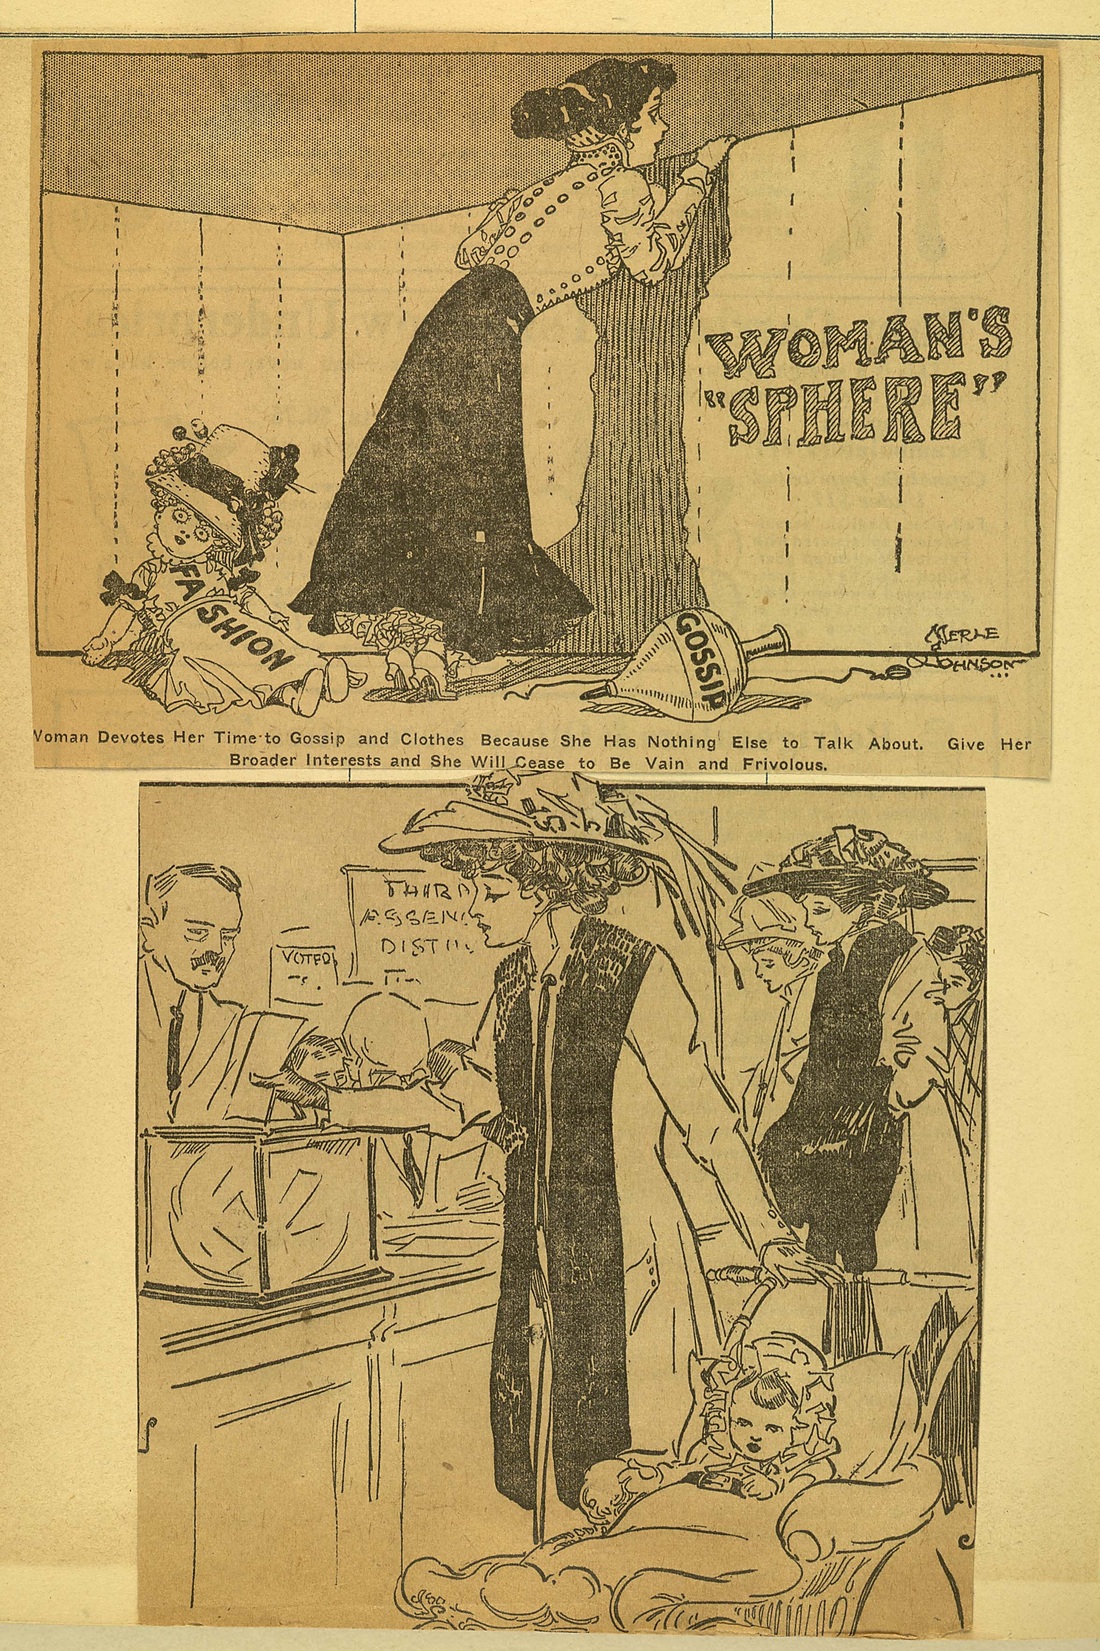 Womanly Woman Mother American Woman Suffrage Dueling Images